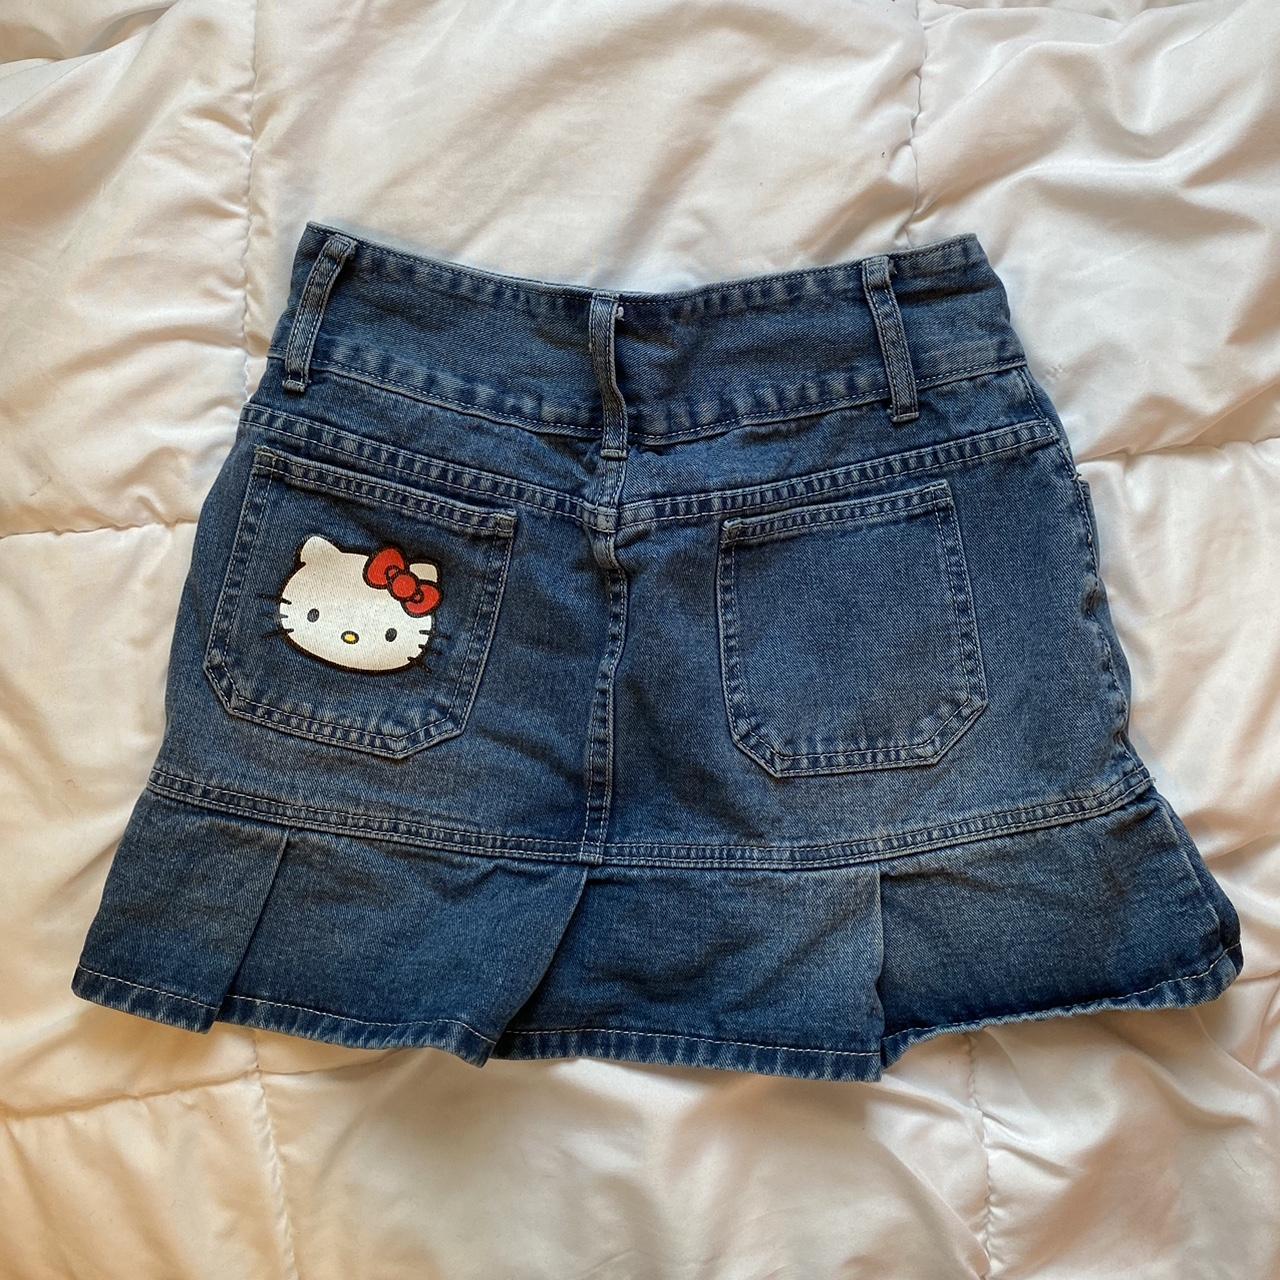 Adorable Hello Kitty denim skirt 🥺 Unknown brand and... - Depop